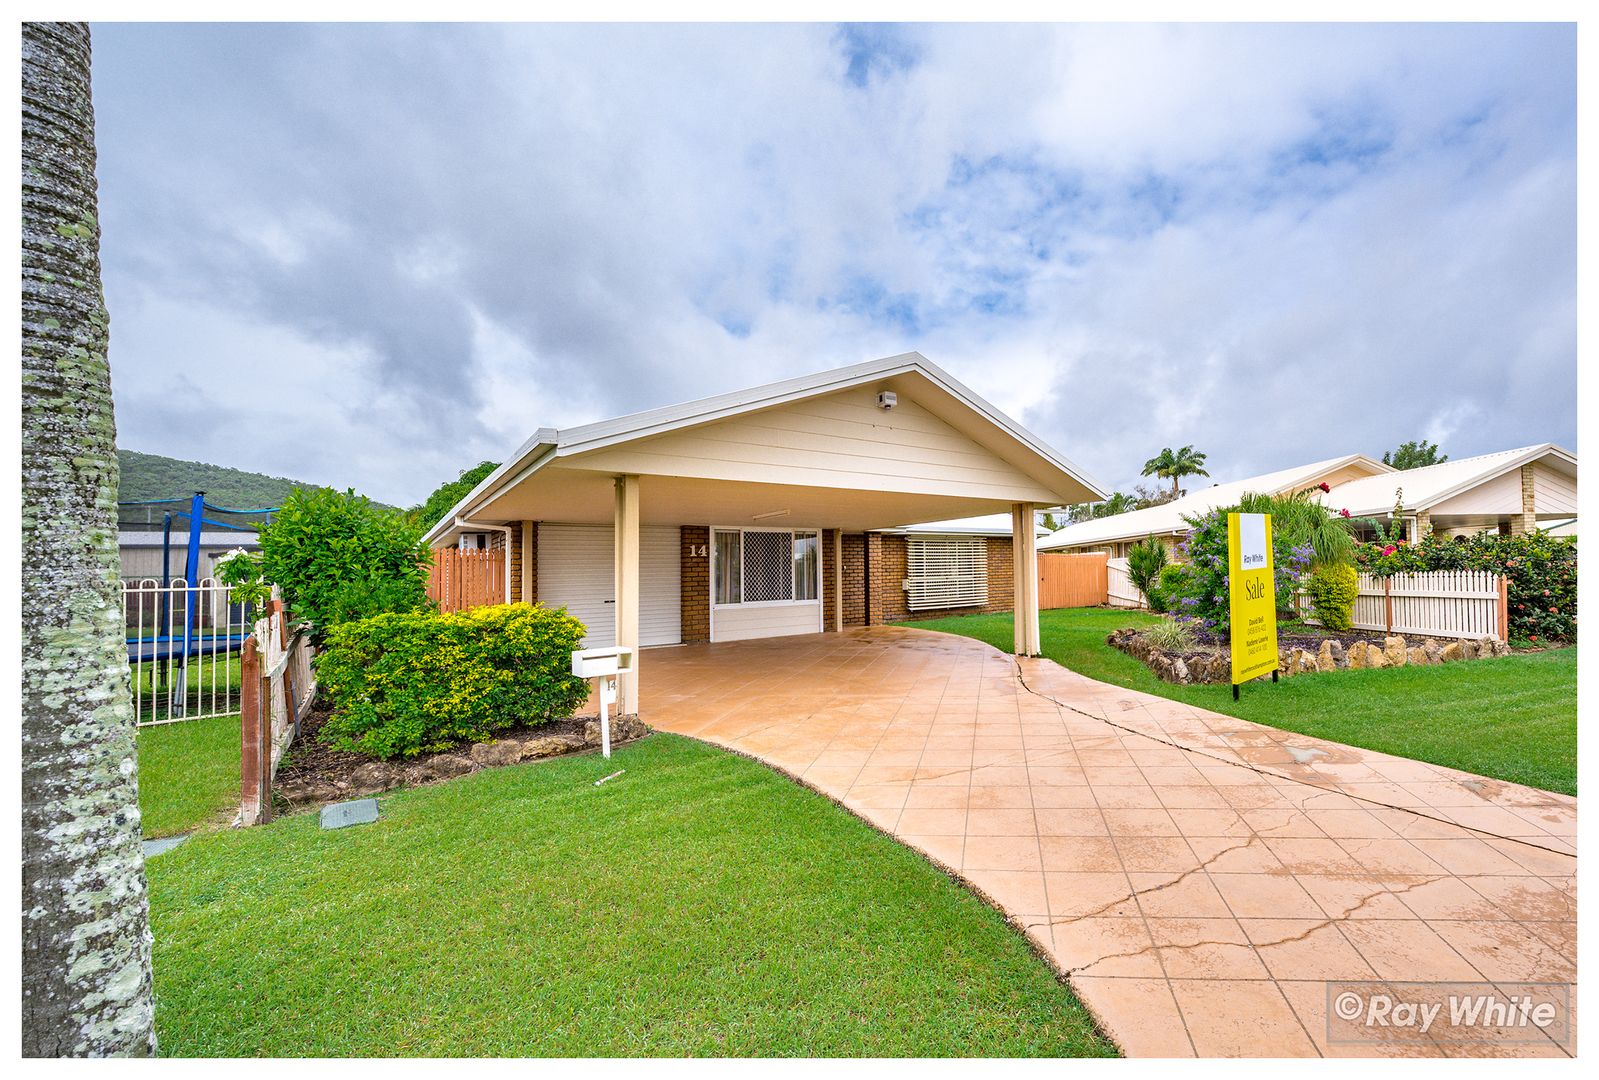 14 Skinner Drive, Norman Gardens QLD 4701, Image 1